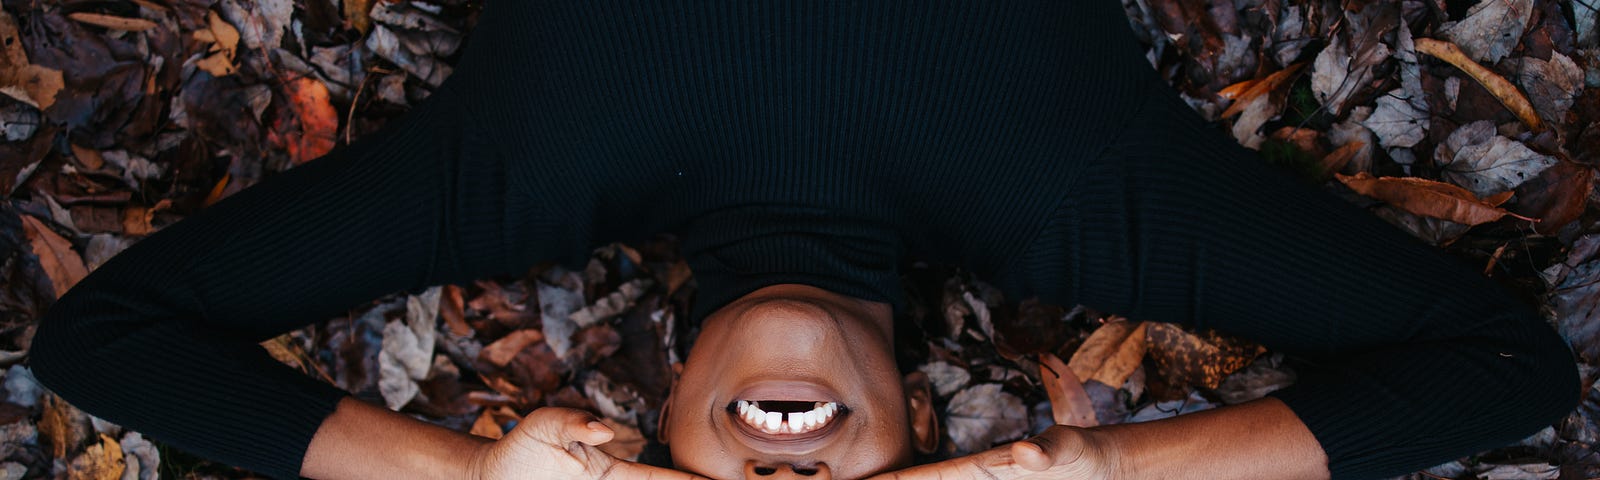 A black woman lays on a pile of leaves. She wears a black turtle neck and covers her eyes with both hands.